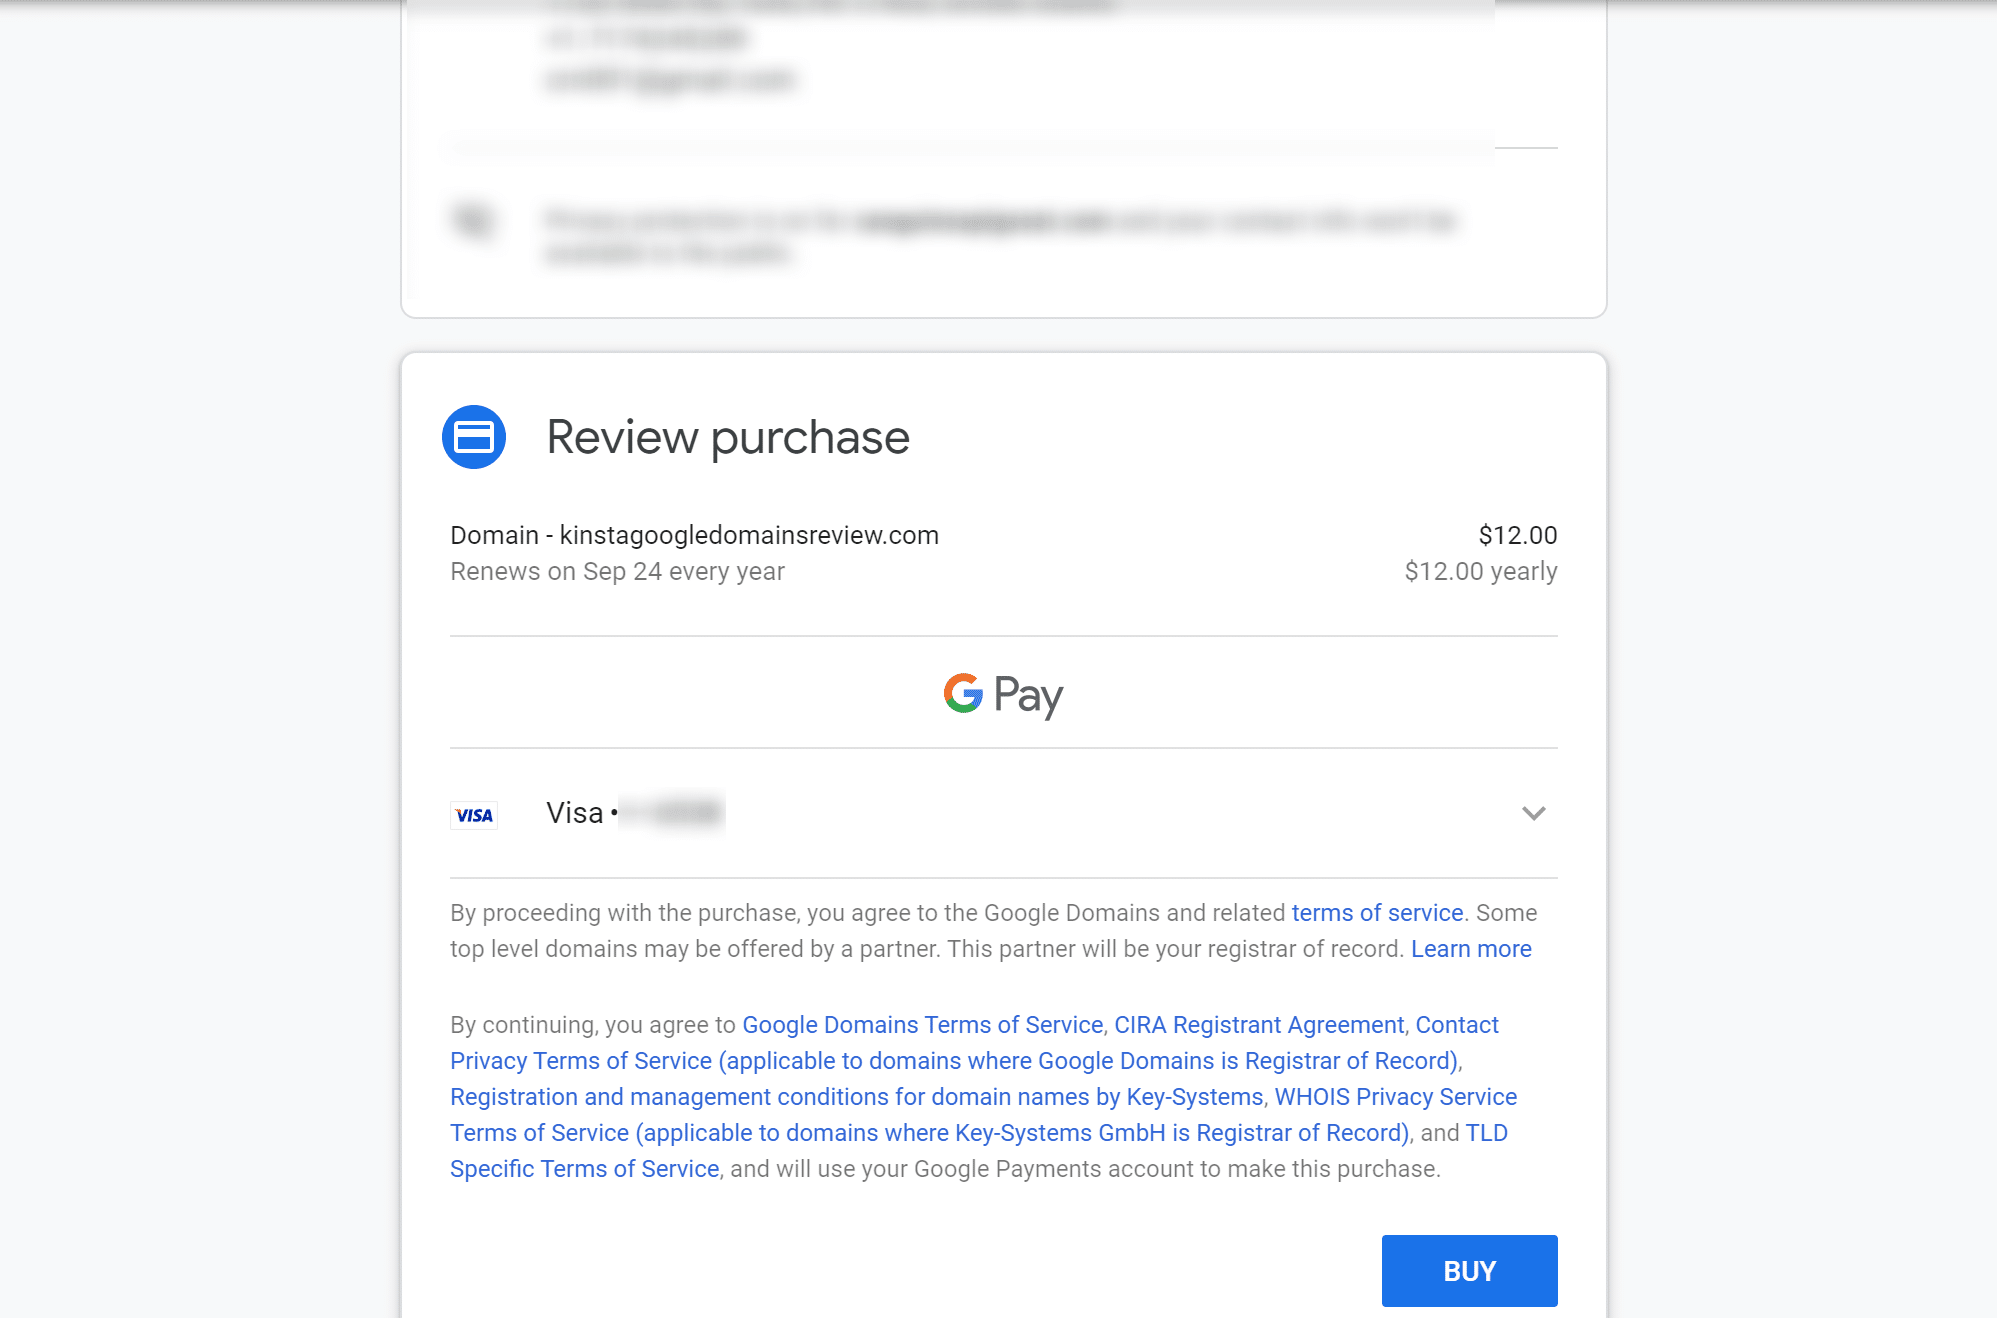 Google domains review: Enter payment information